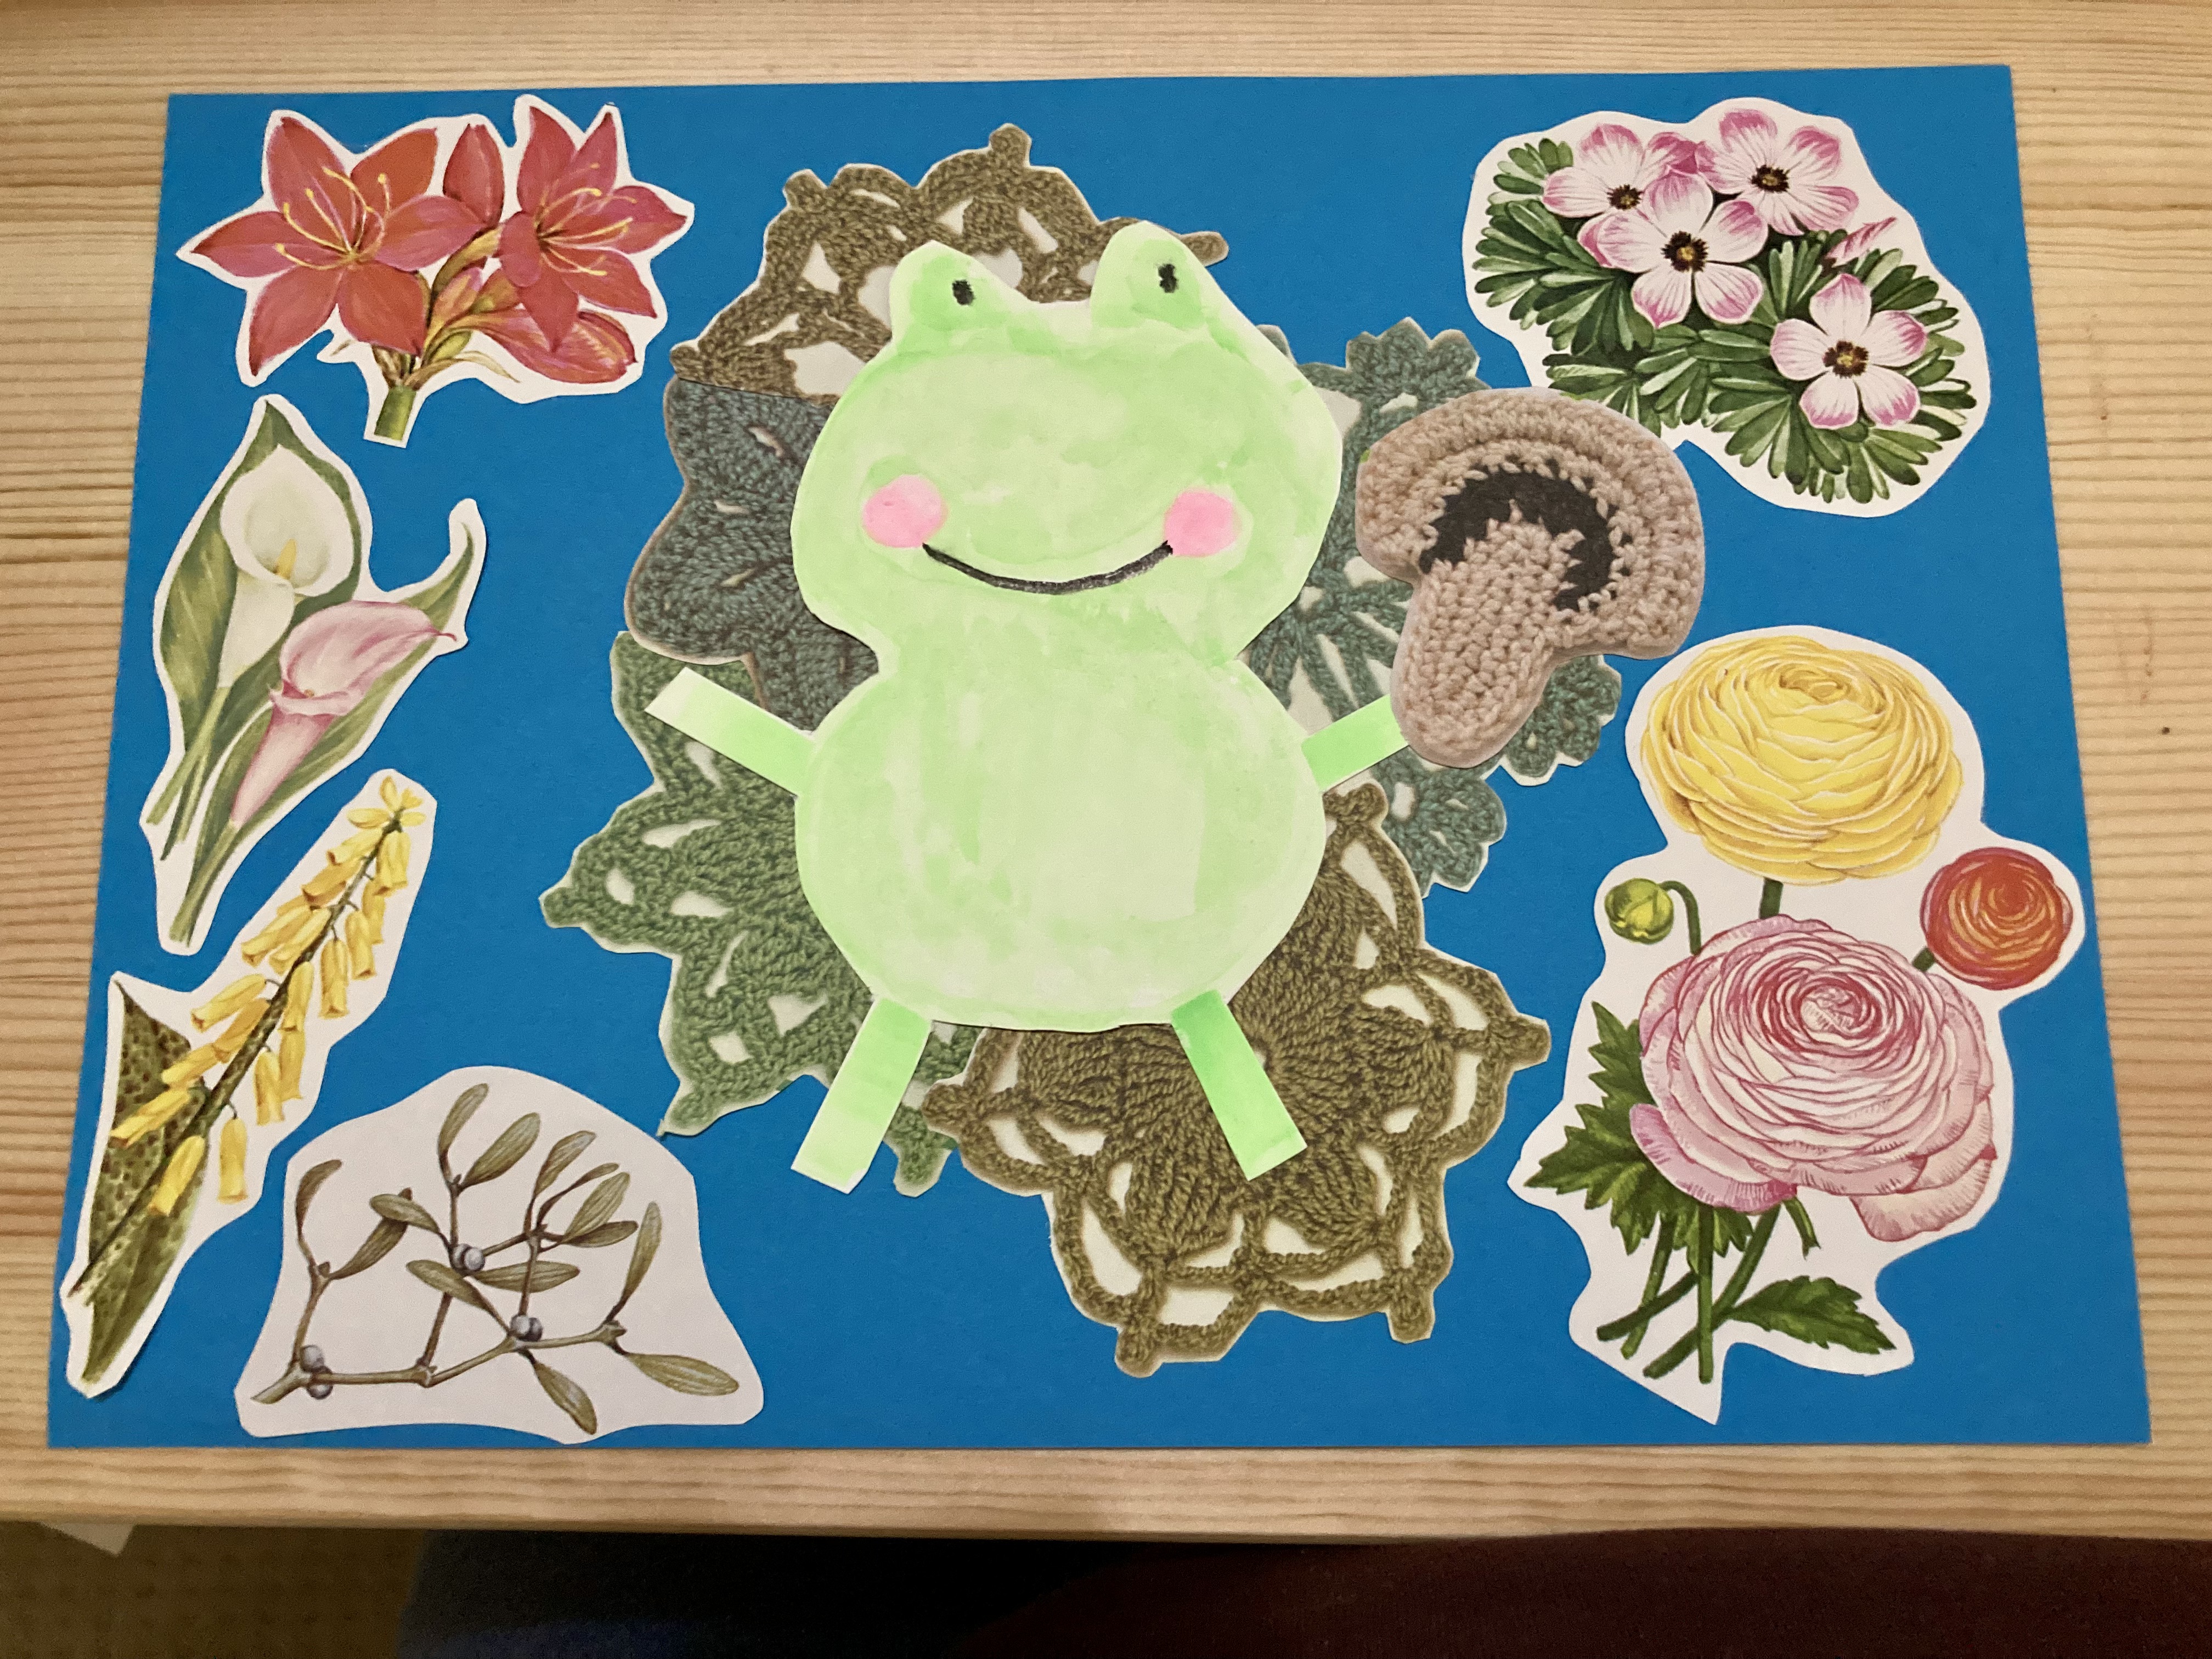 A collage. The cartoon frog from earlier in the gallery sits of a lilypad made of green crocheted doilies, surrounded by flowers.